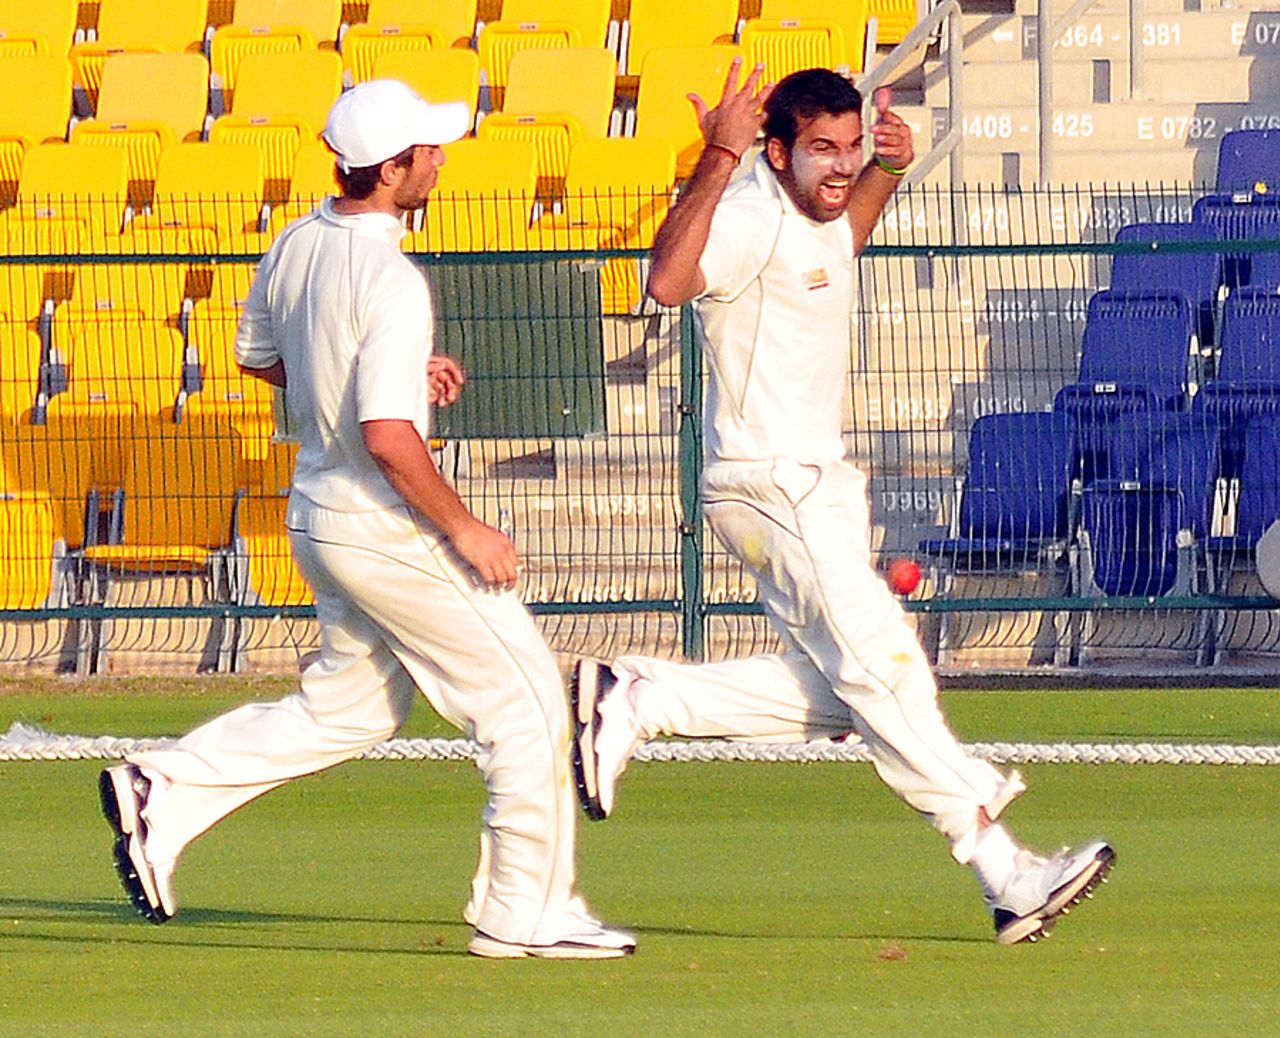 Dawlat Zadran took four wickets in Afghanistan's innings-and-5-run victory, Afghanistan v Scotland, ICC intercontinental Cup, Abu Dhabi, 3rd day, March 14, 2013